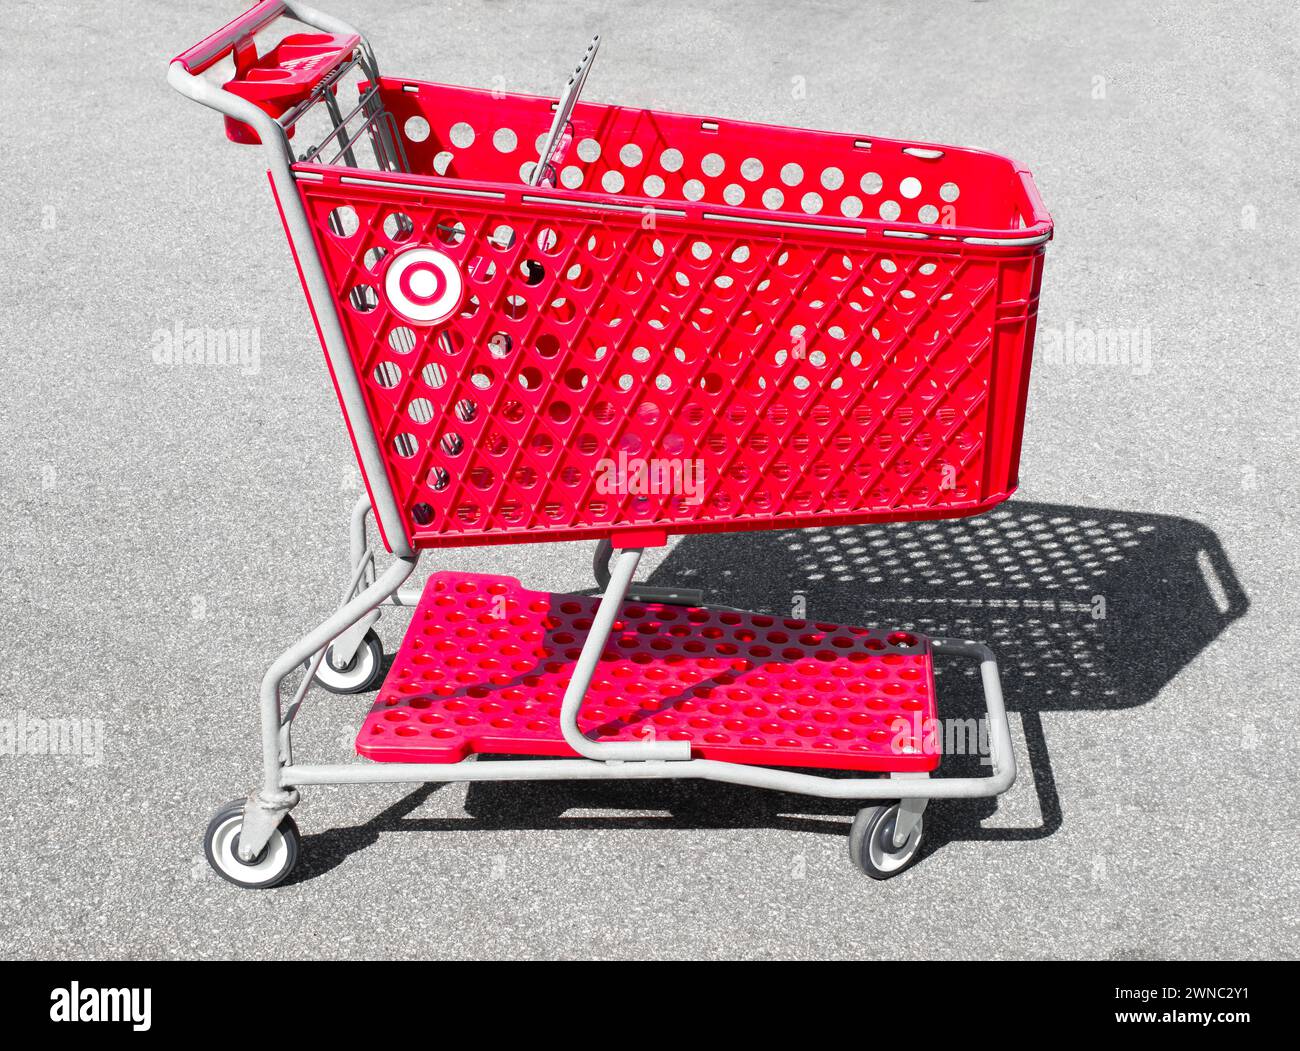 Ocala, Florida 2-27-2024 abandoned empty Red shopping basket, cart, stroller, buggy, trolley isolated on concrete parking lot at a Target retail store Stock Photo